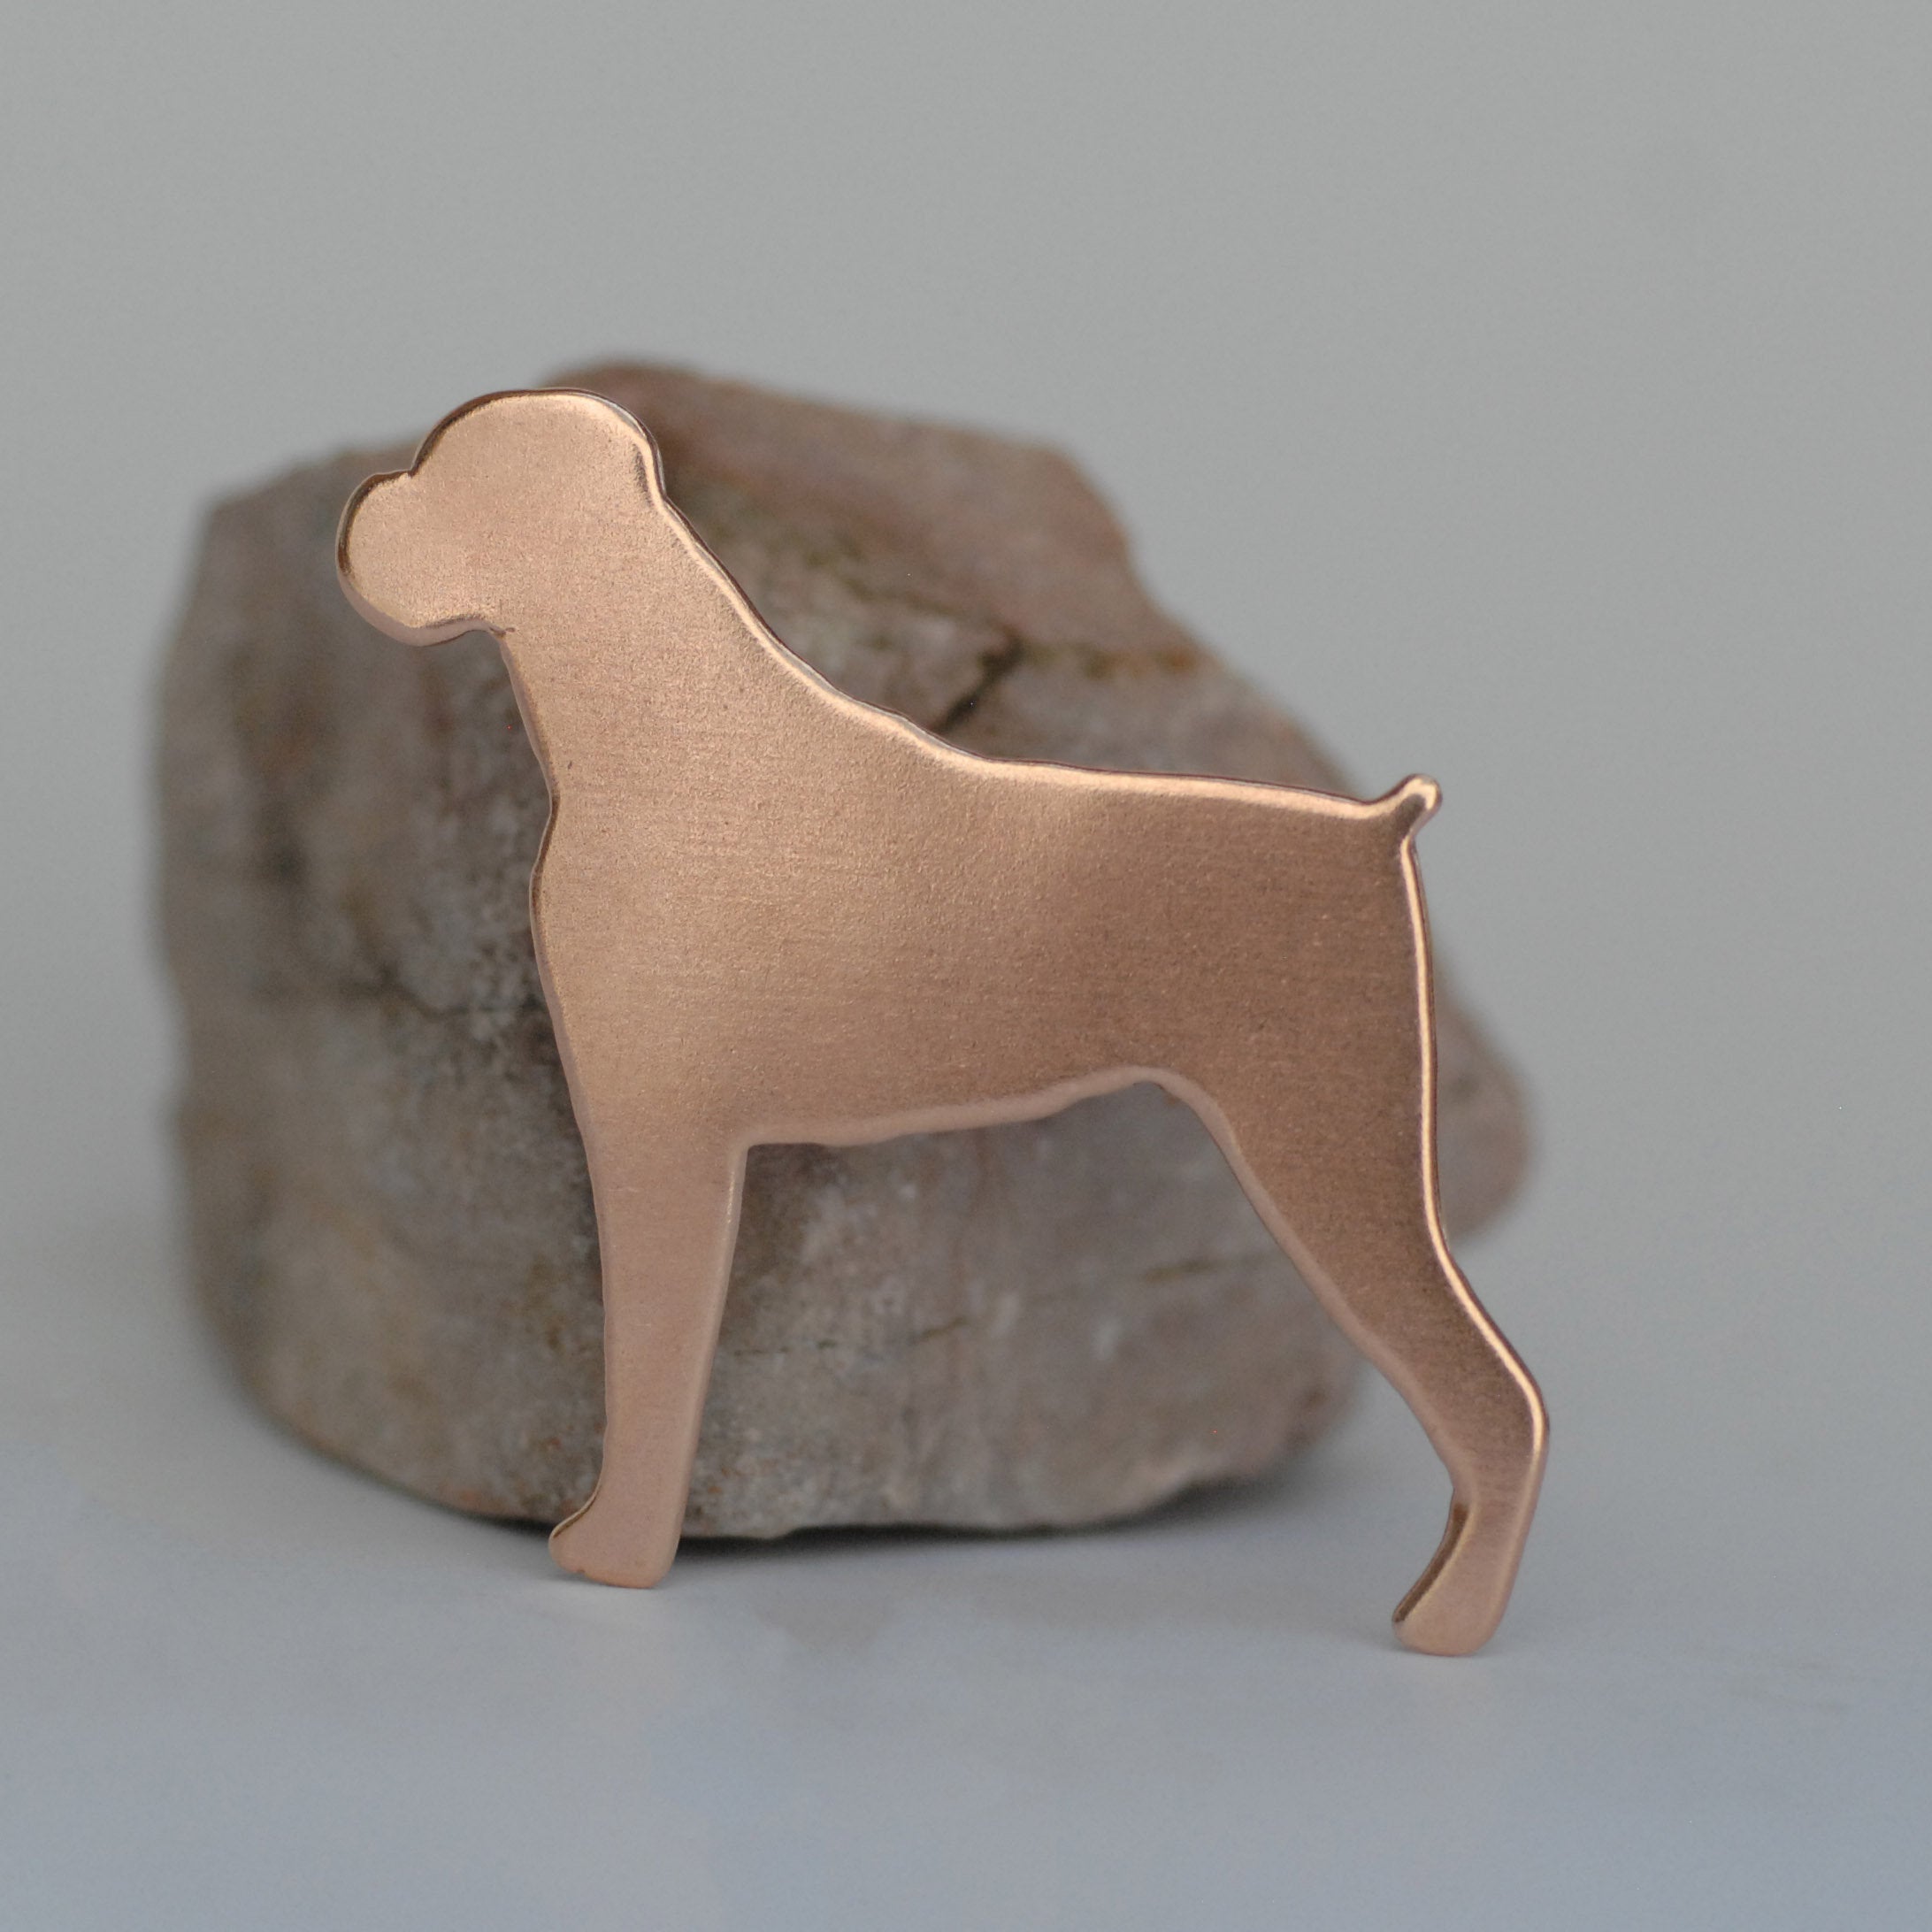 Boxer Dog shapes for making jewelry, keychains, metal blanks copper, brass, bronze, nickel silver